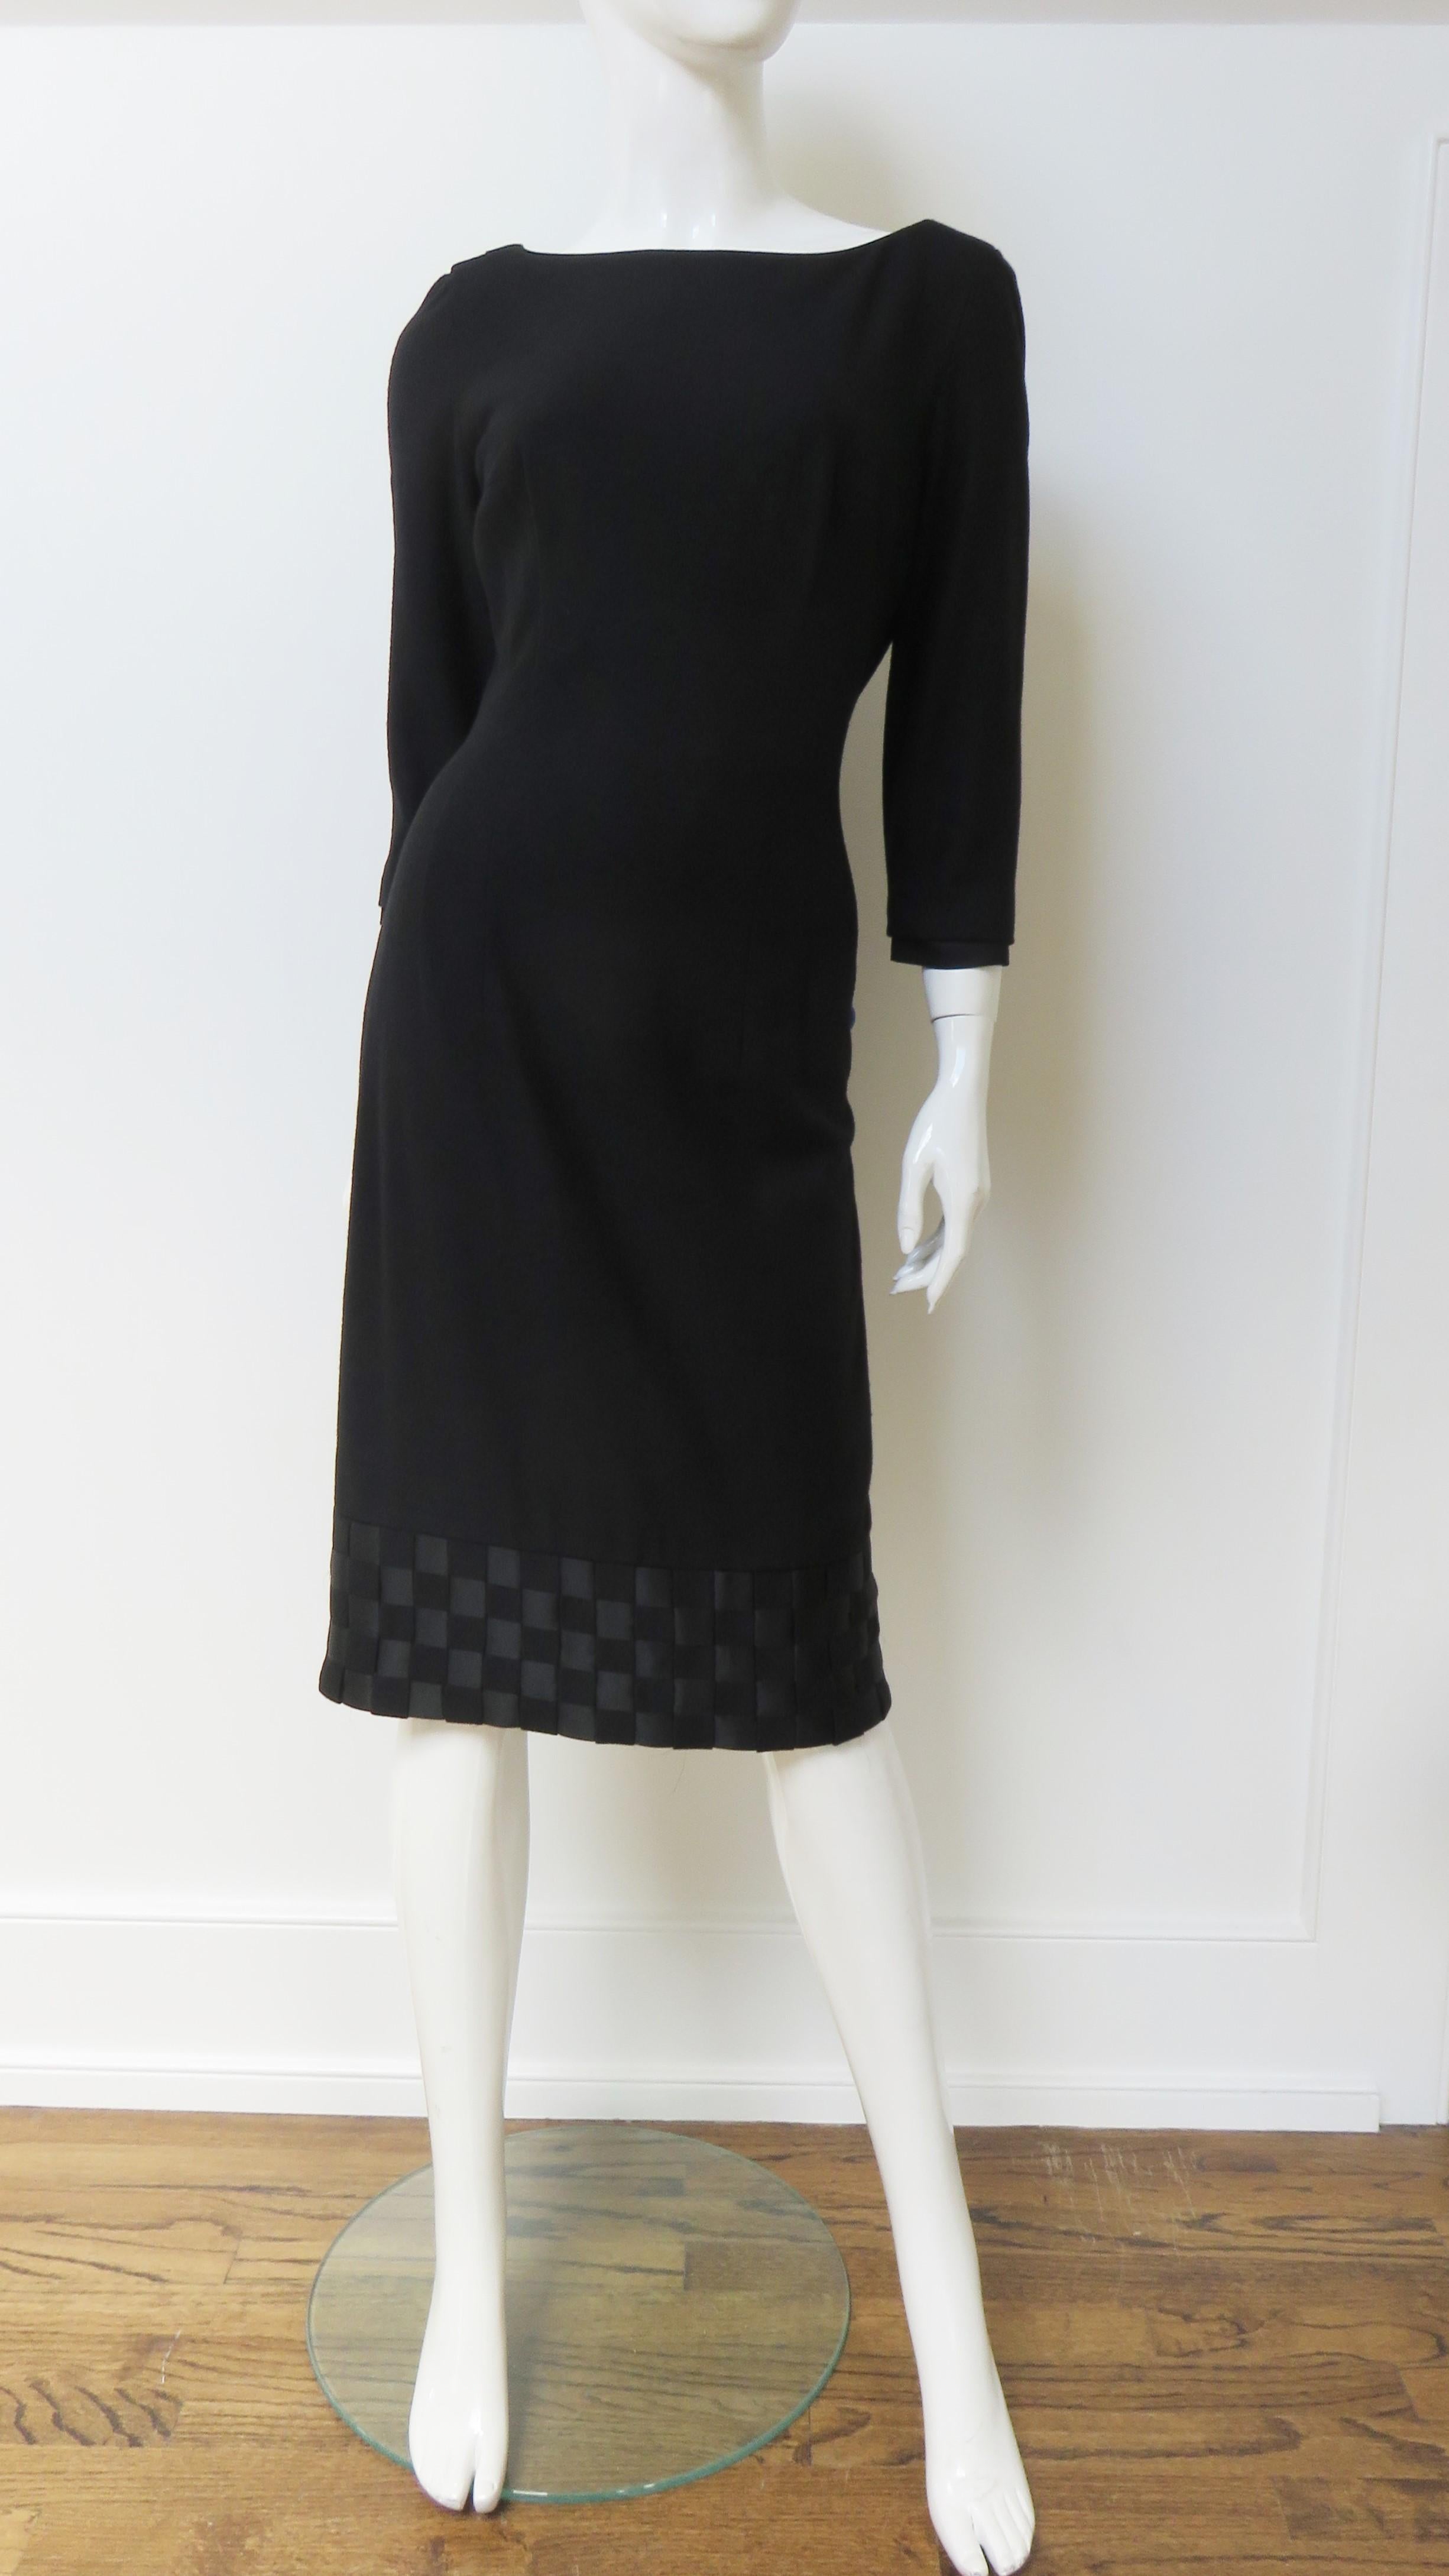 Mr Blackwell Woven Hem and Collar 1950s Dress For Sale 5